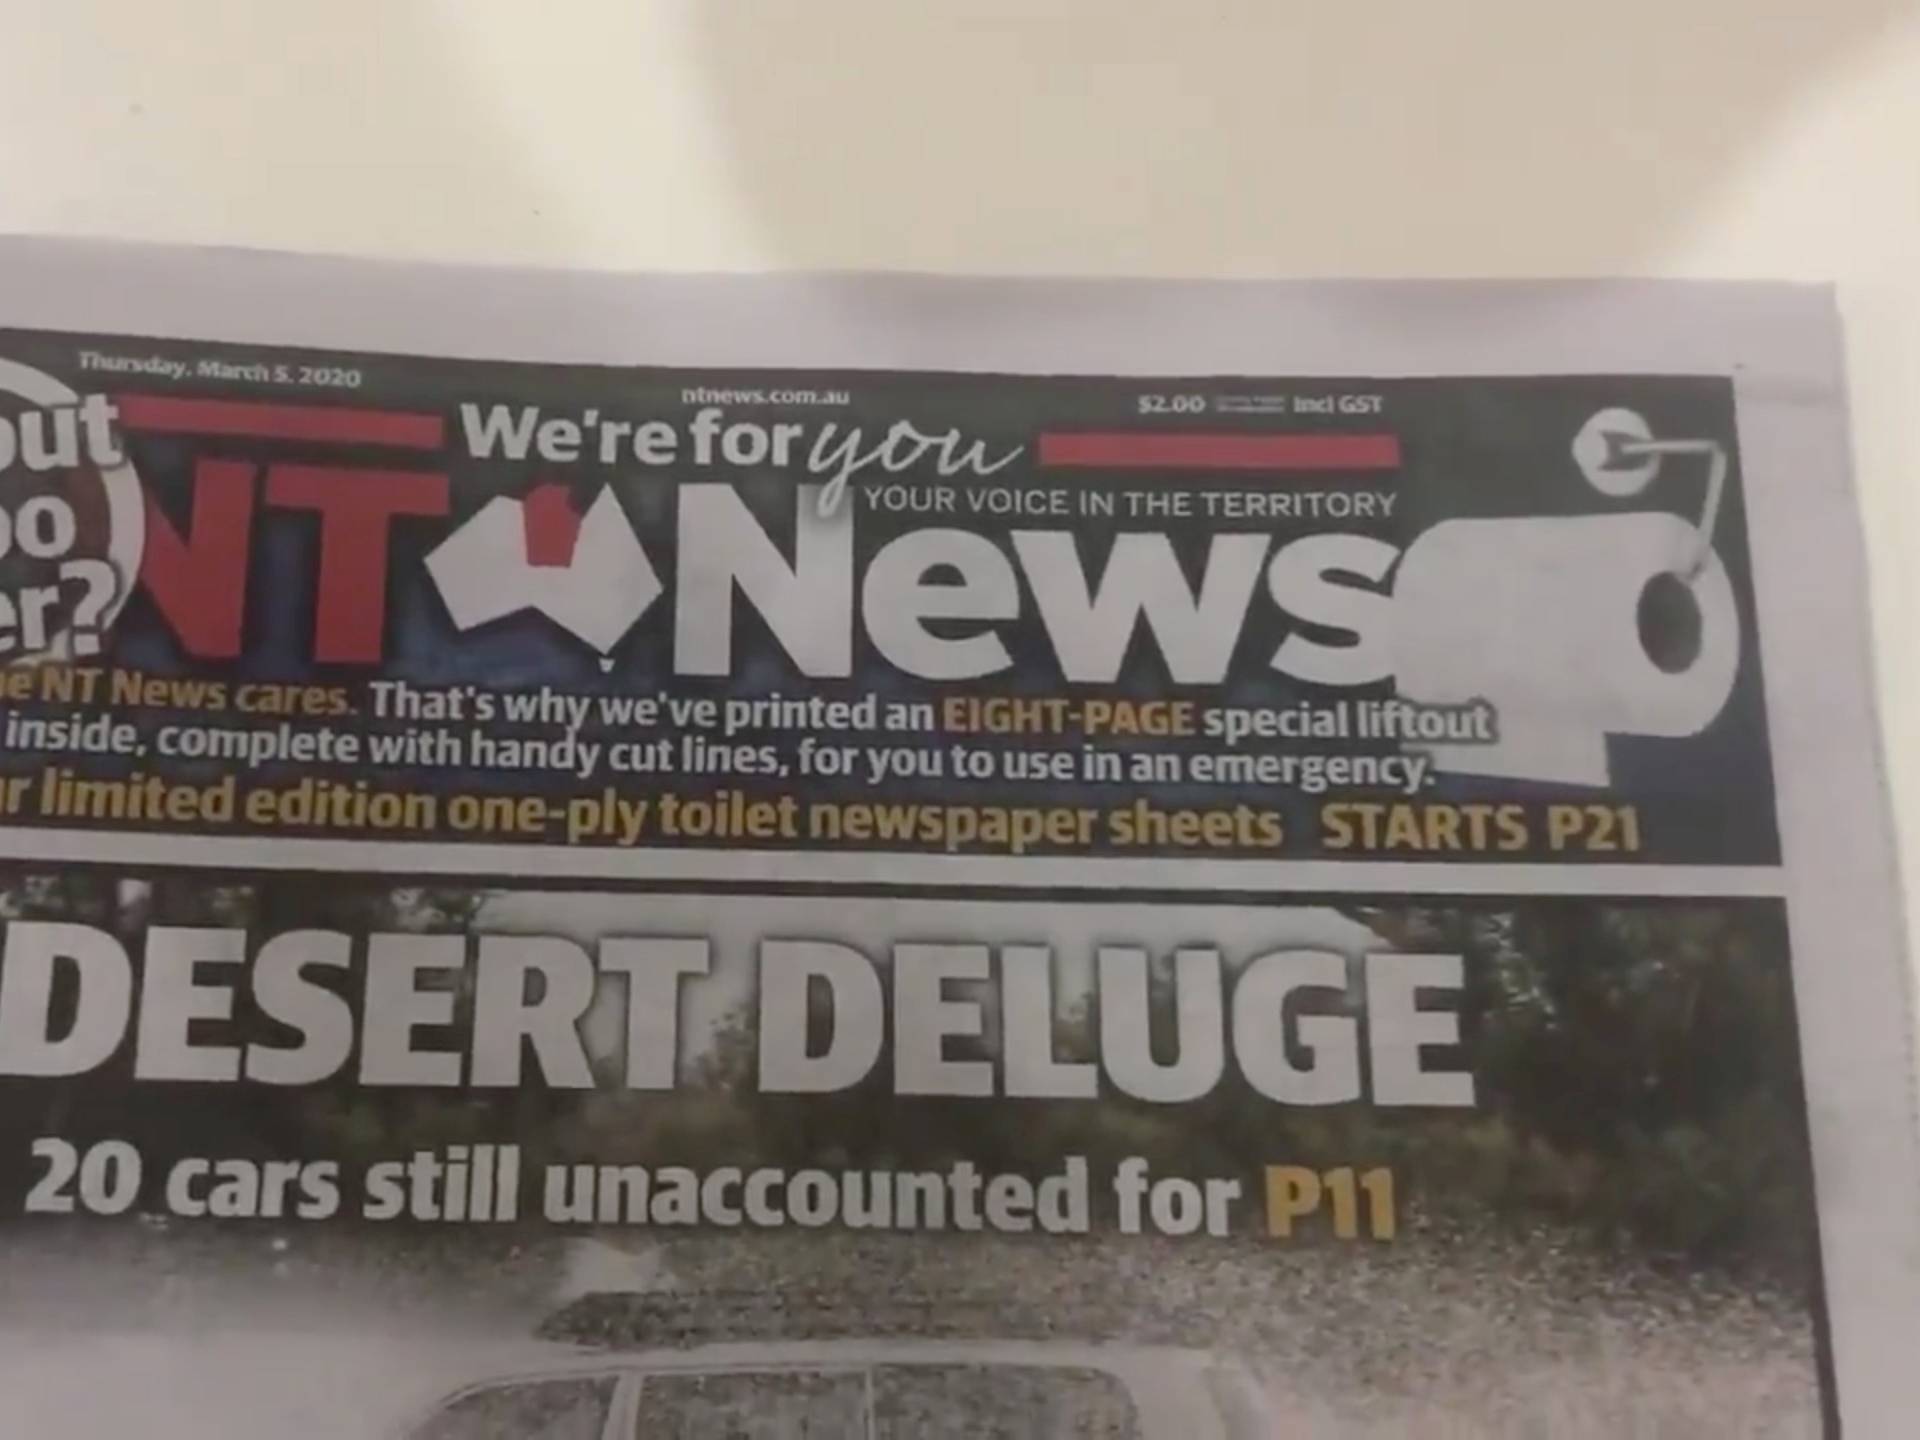 A headline of the Australian newspaper NT News is seen on their "toilet paper" edition containing pages with liftout and cut lines, in Darwin